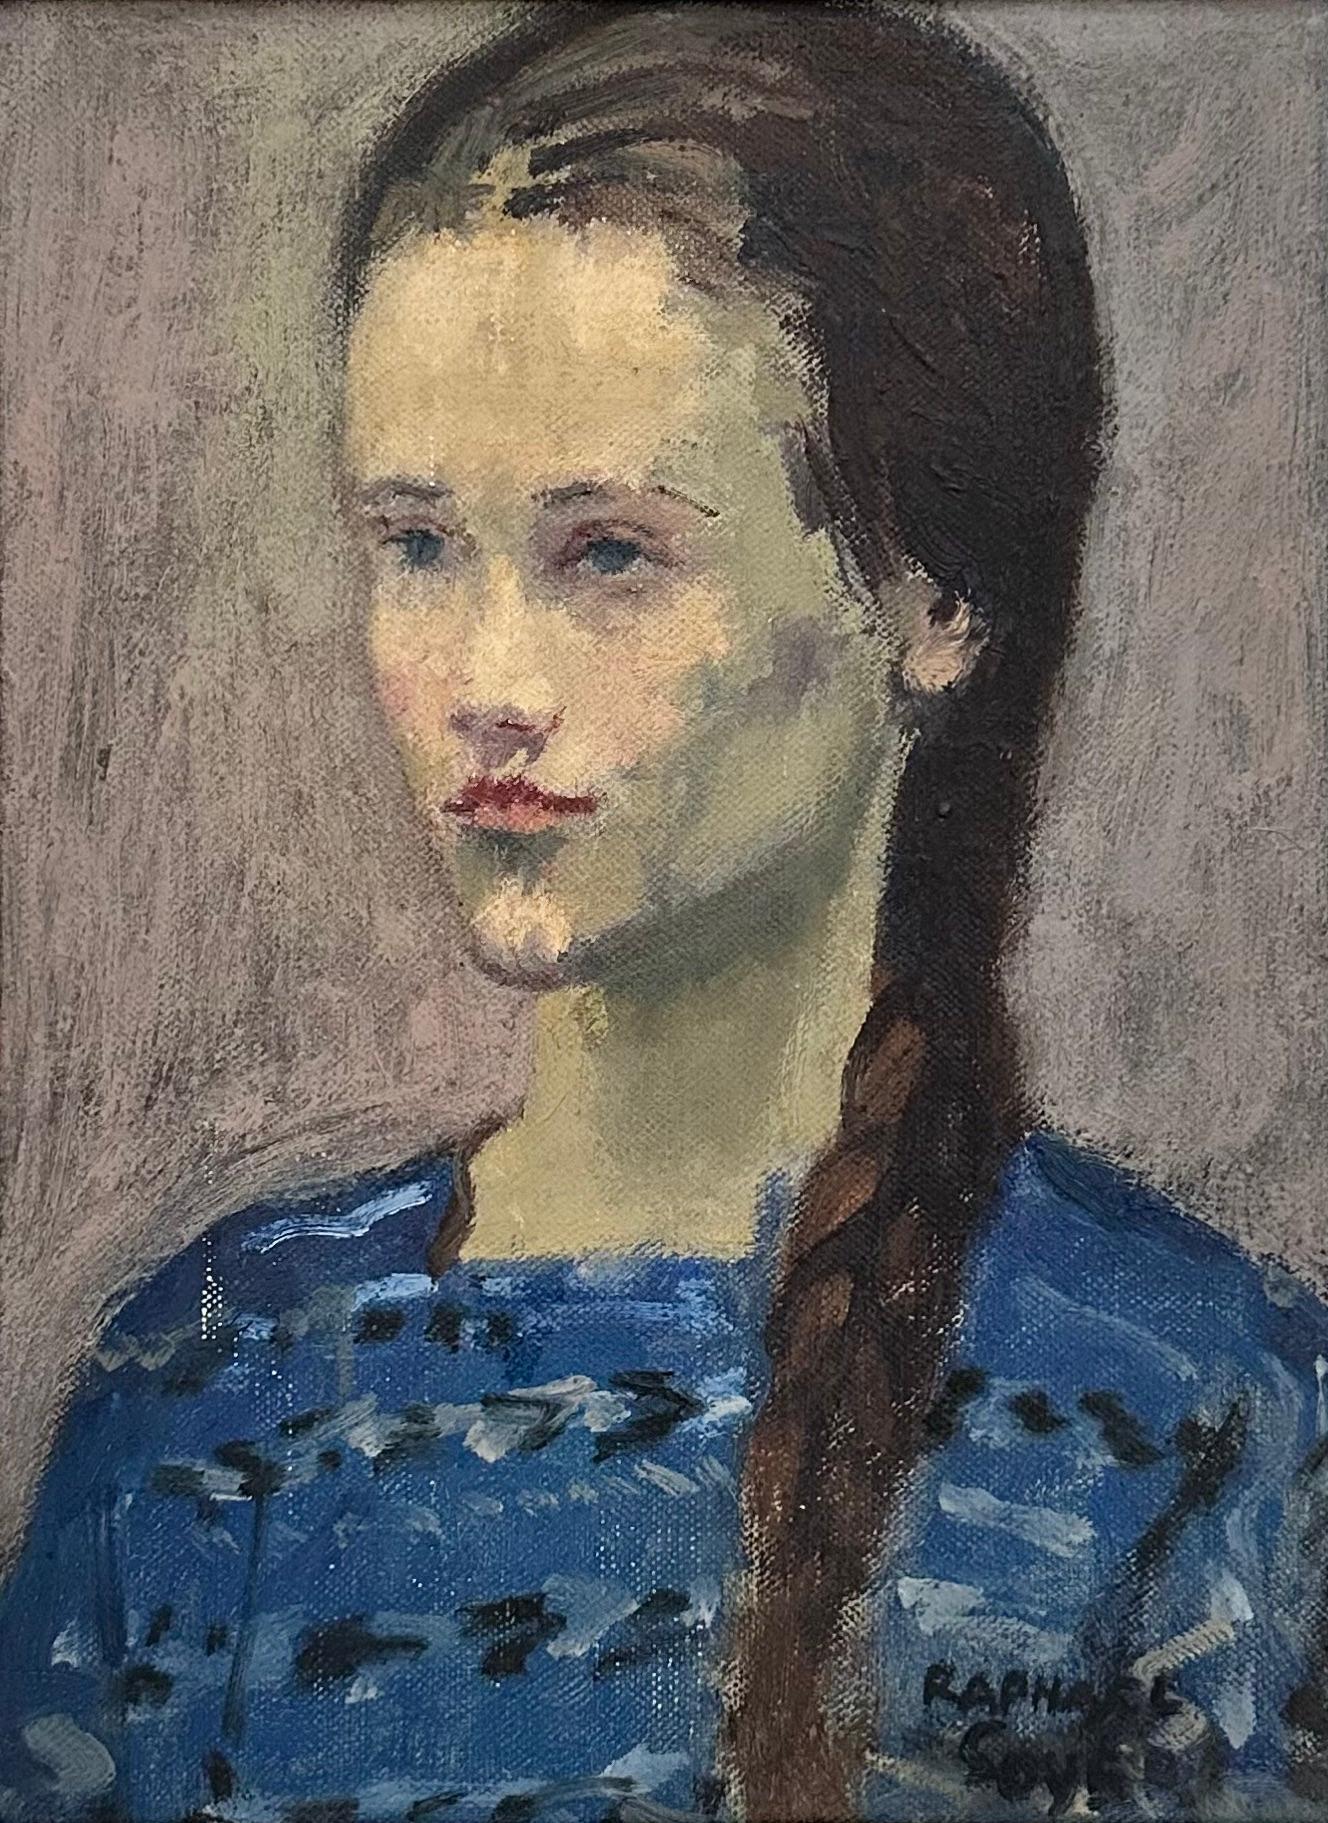 Artist: Raphael Soyer (1899-1987)
Title: Girl with Braided Hair
Year: Circa 1987
Medium: Oil on canvas
Size: 12 x 9 inches; framed size, 19 x 16 inches
Condition: Excellent
Inscription: Signed by the artist

RAPHAEL SOYER (1899-1987) Russian-born